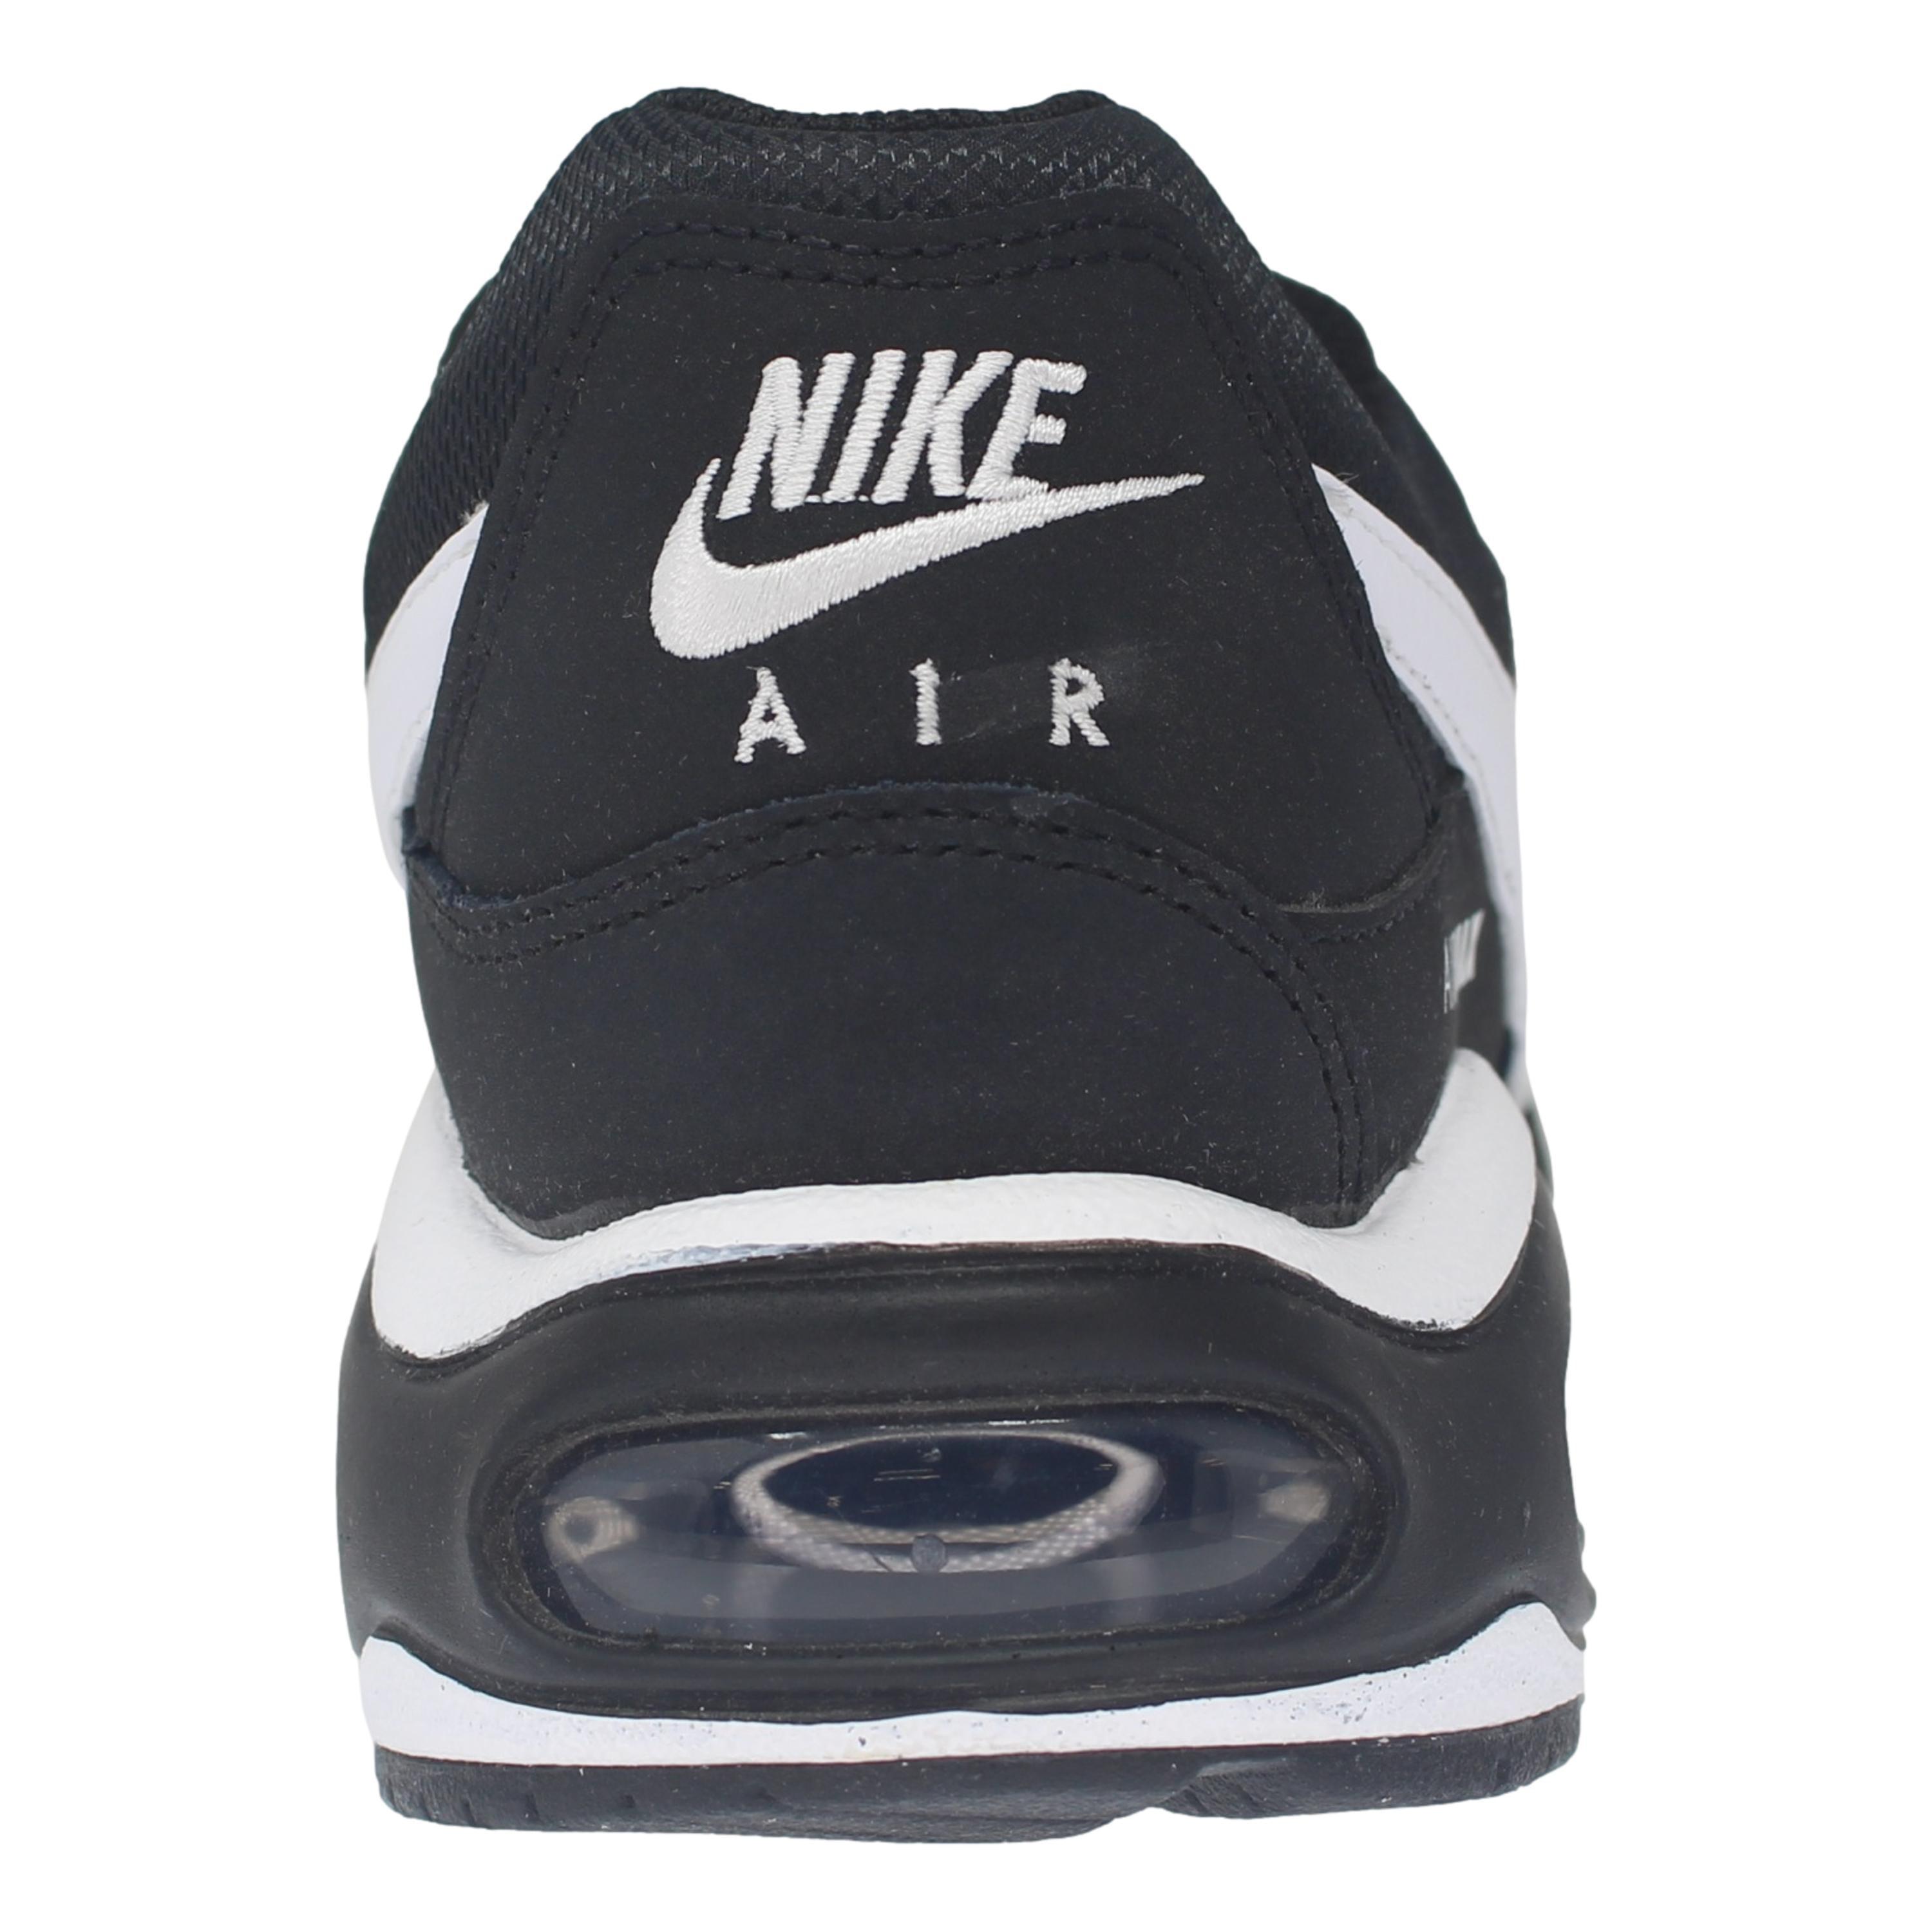 Nike Air Max Command /white 397690-021 in Black | Lyst